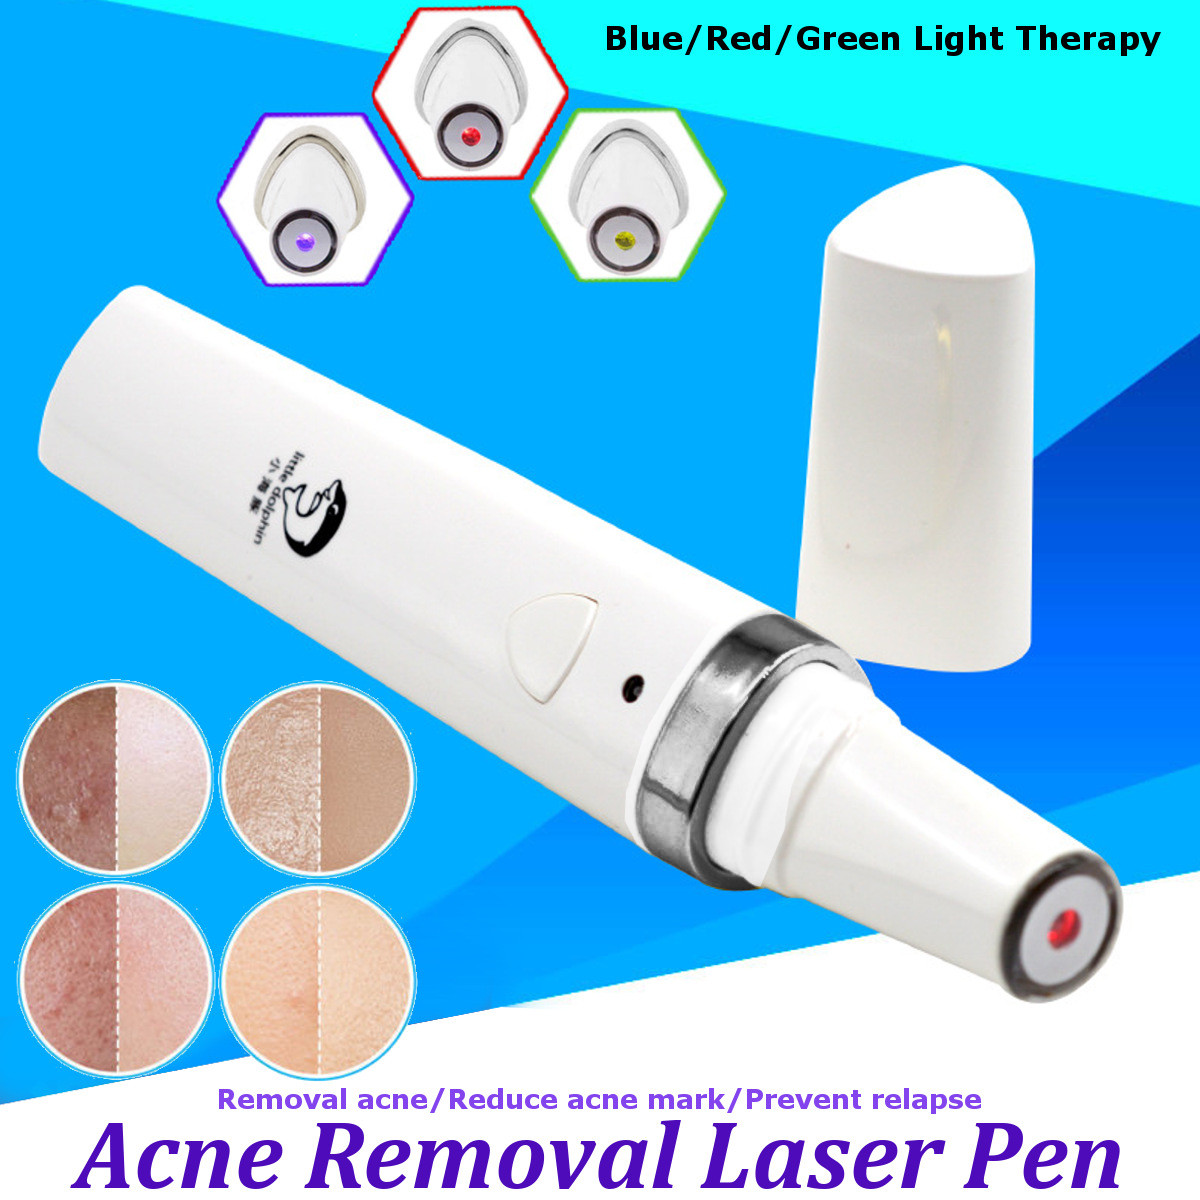 Blue-Red-Green-Light-Therapy-Acne-Laser-Pen-Soft-Scar-Removal-Treatment-Device-Beauty-Machine-1368410-2